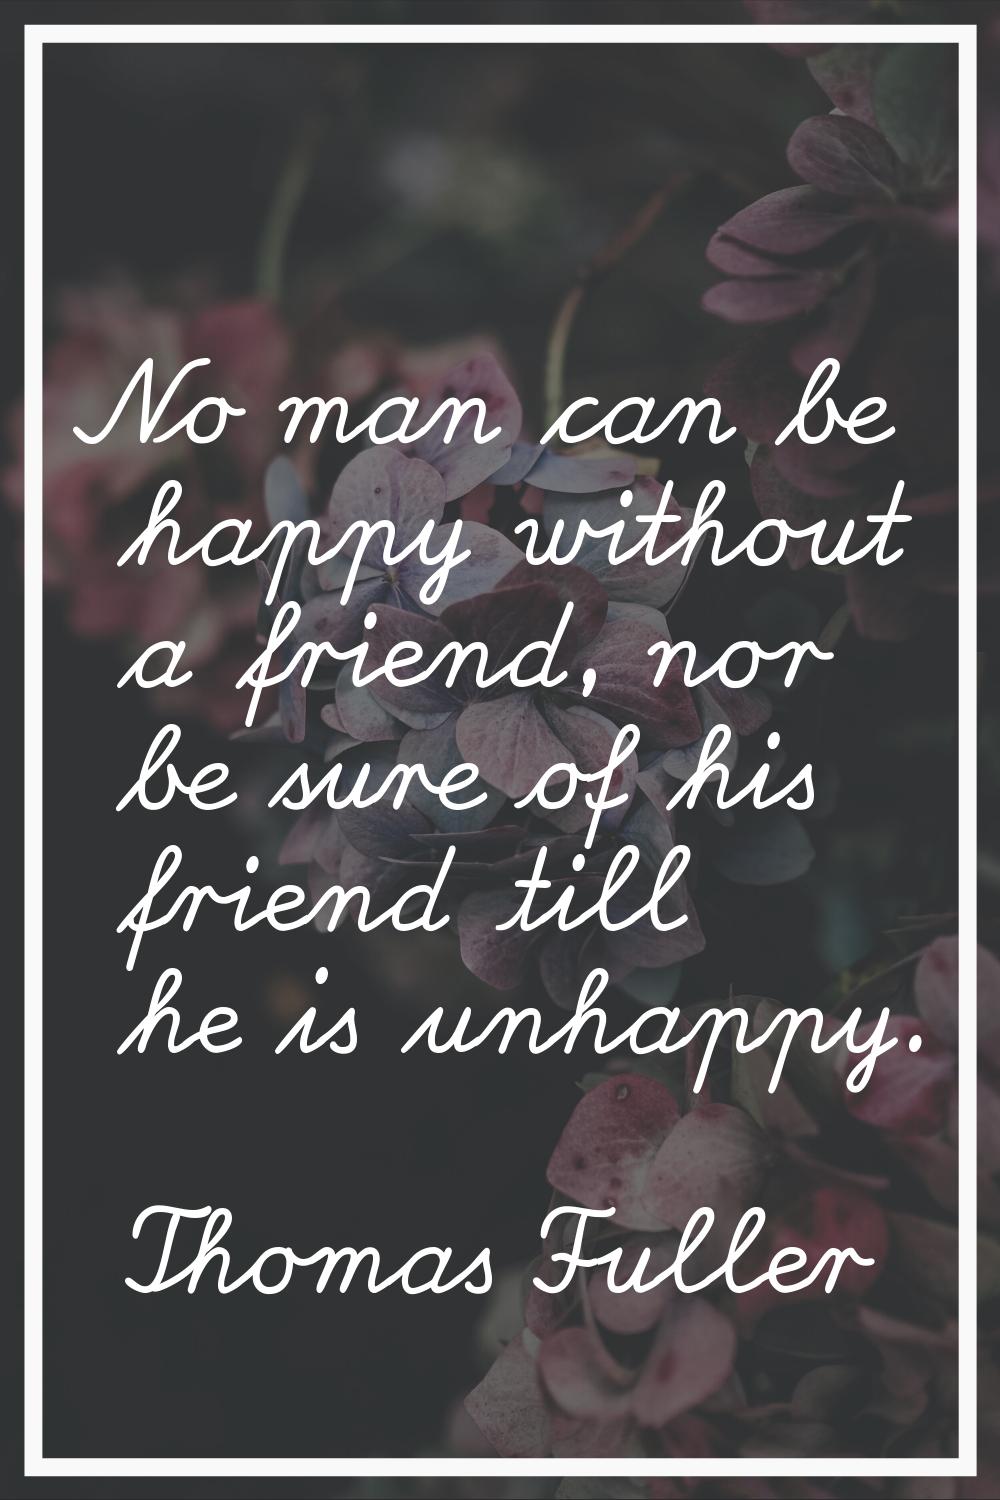 No man can be happy without a friend, nor be sure of his friend till he is unhappy.